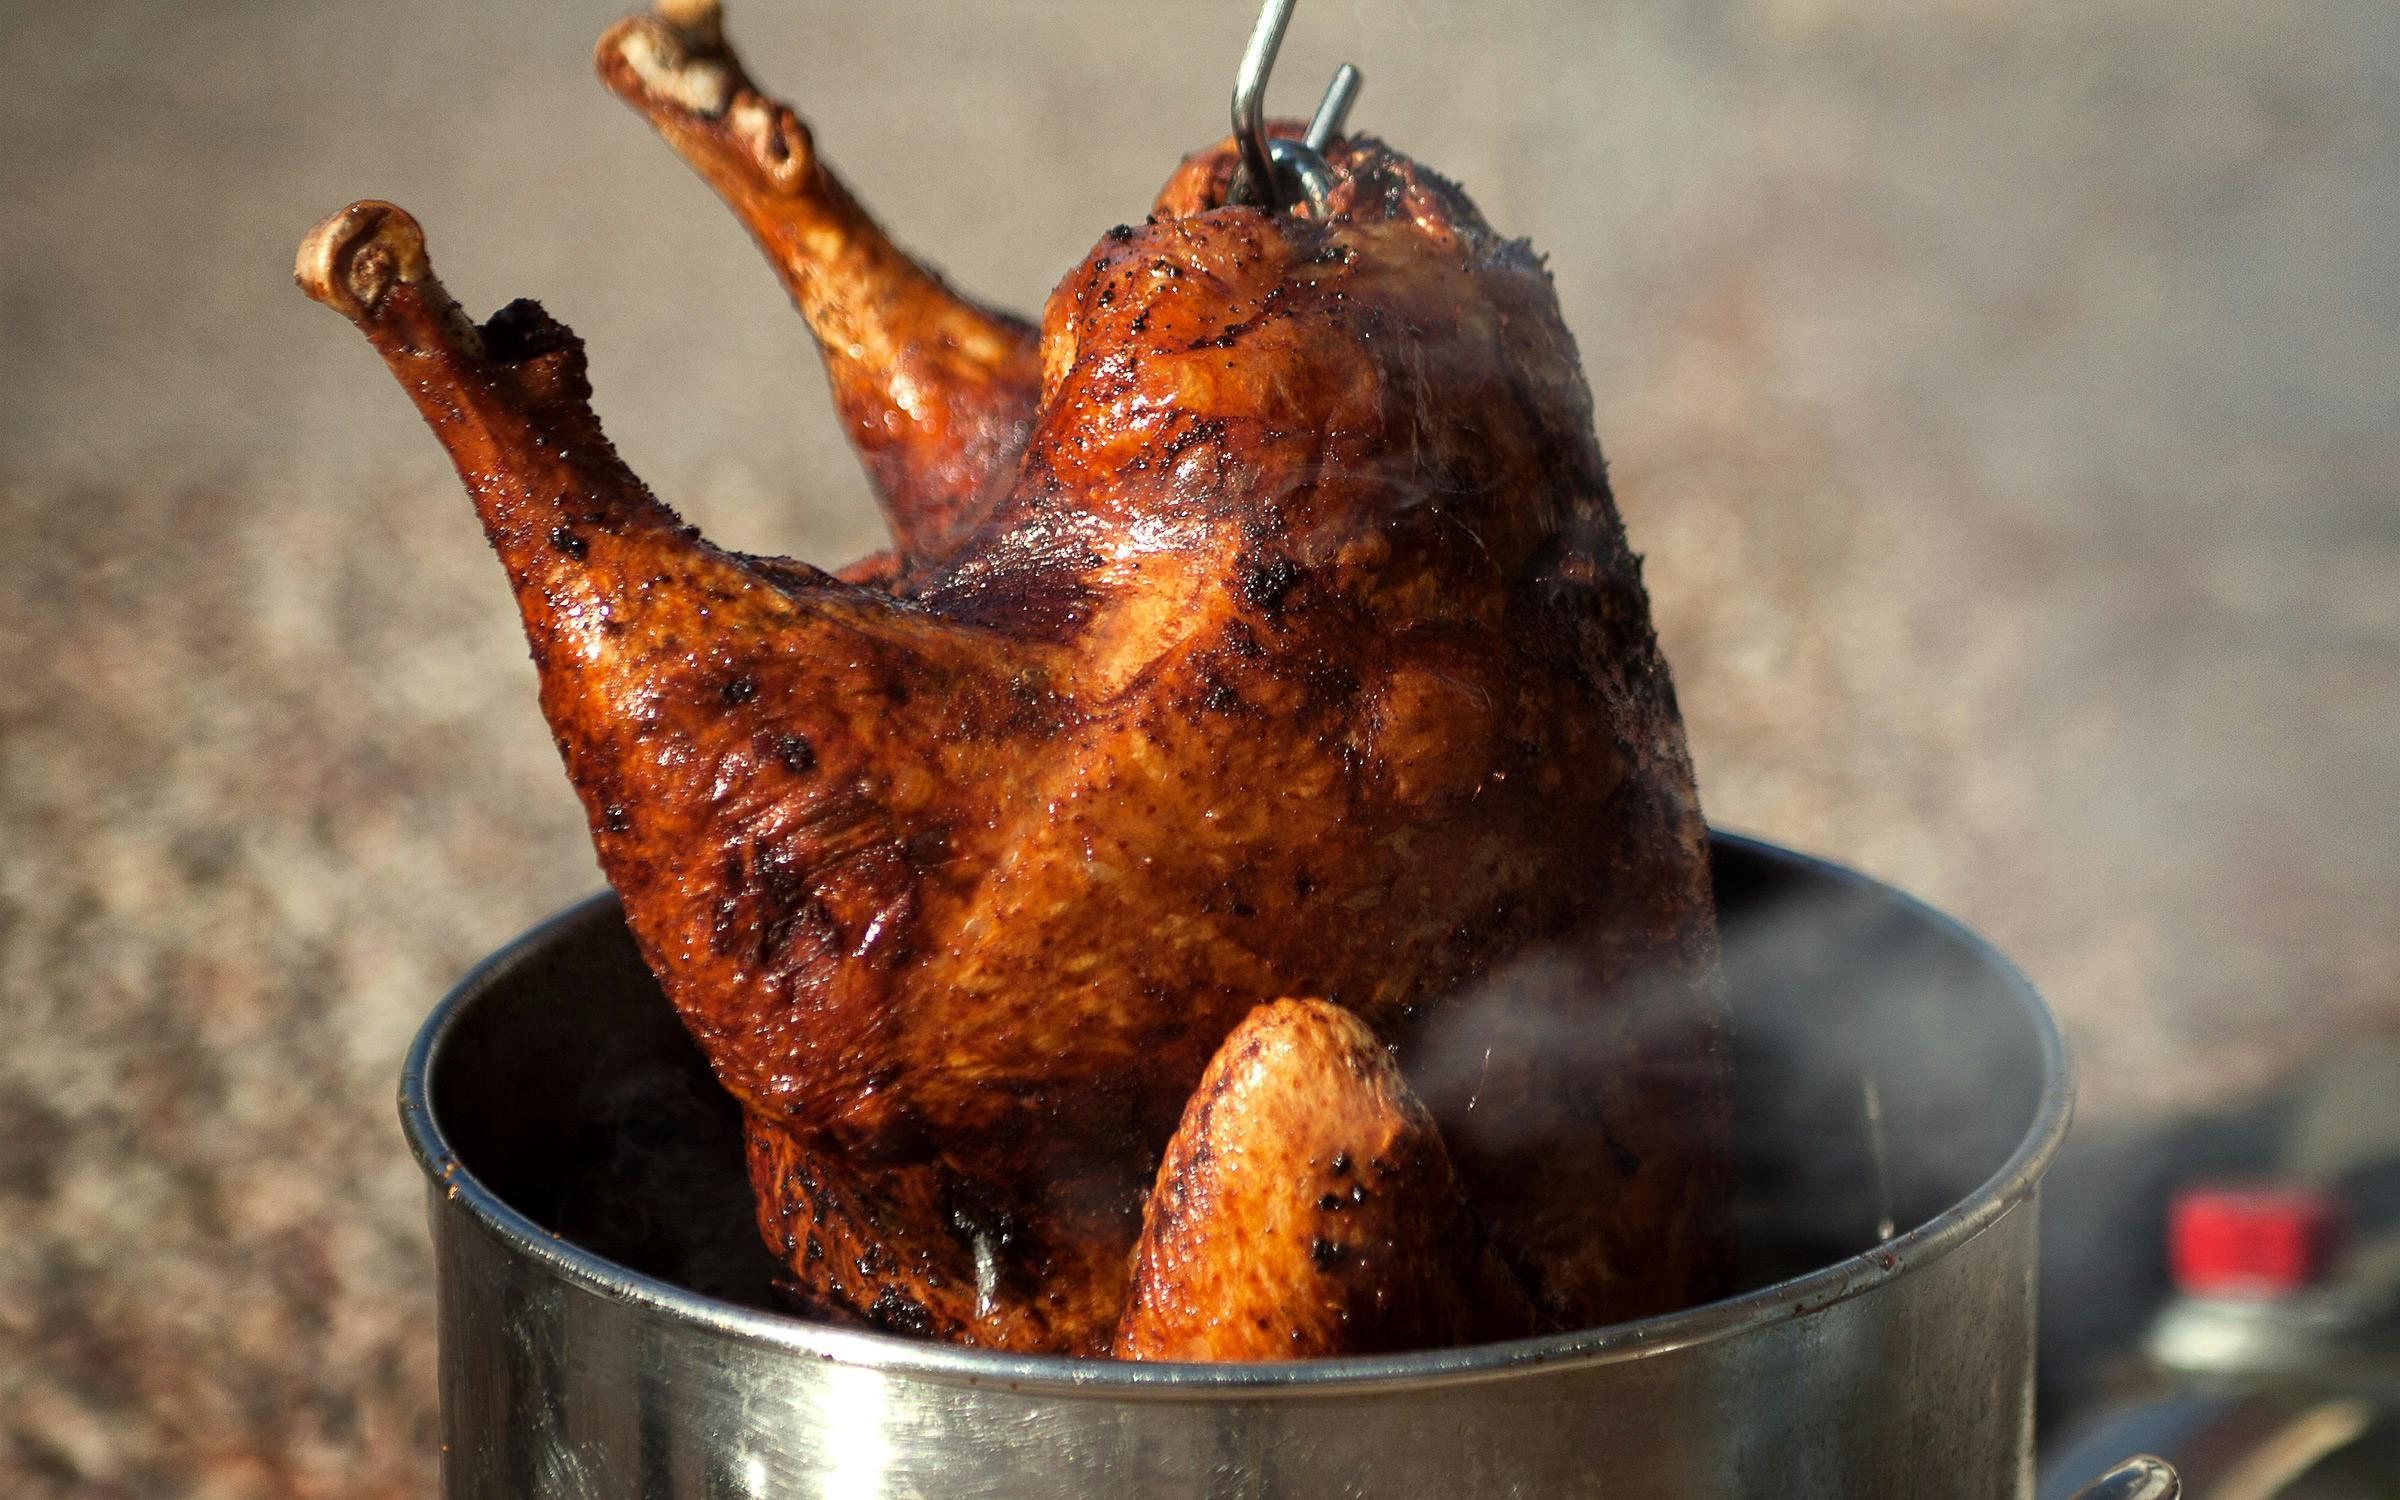 https://img.texasmonthly.com/2022/11/deep-fry-turkey.jpg?auto=compress&crop=faces&fit=fit&fm=pjpg&ixlib=php-3.3.1&q=45